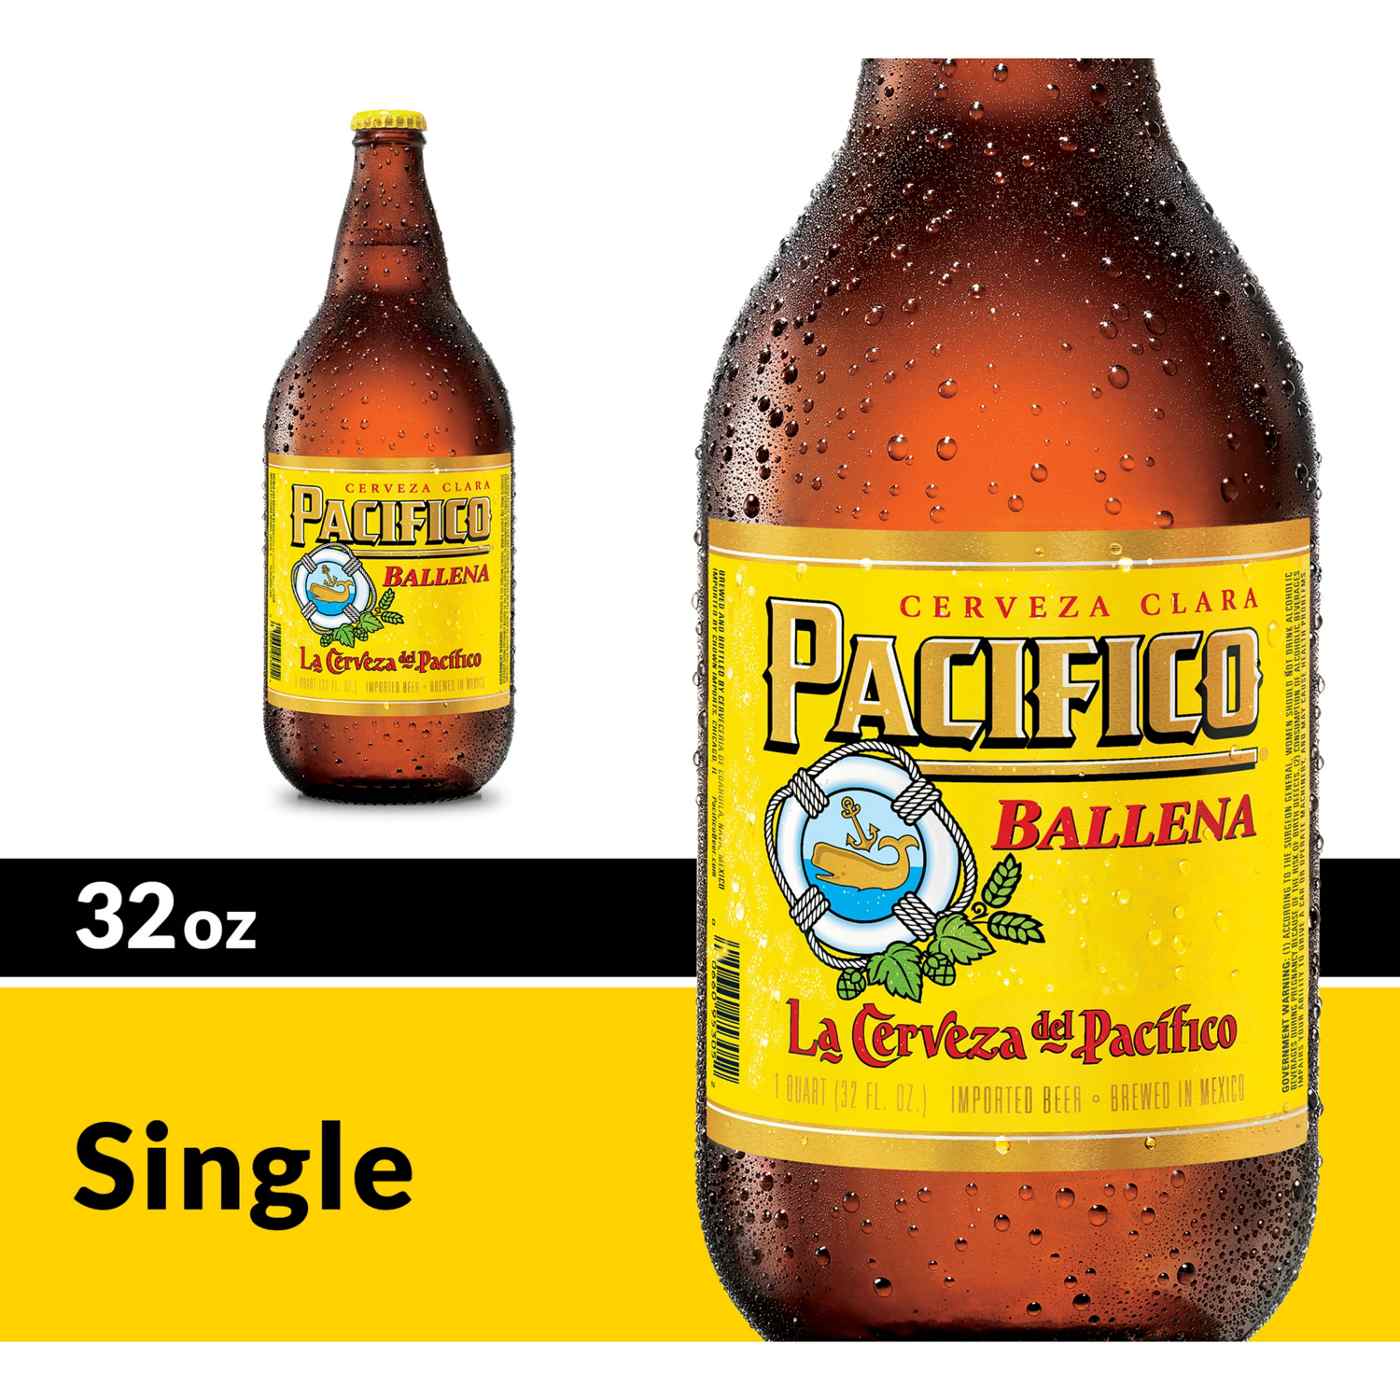 Pacifico Clara Ballena Mexican Lager Import Beer 32 oz Bottle; image 4 of 8